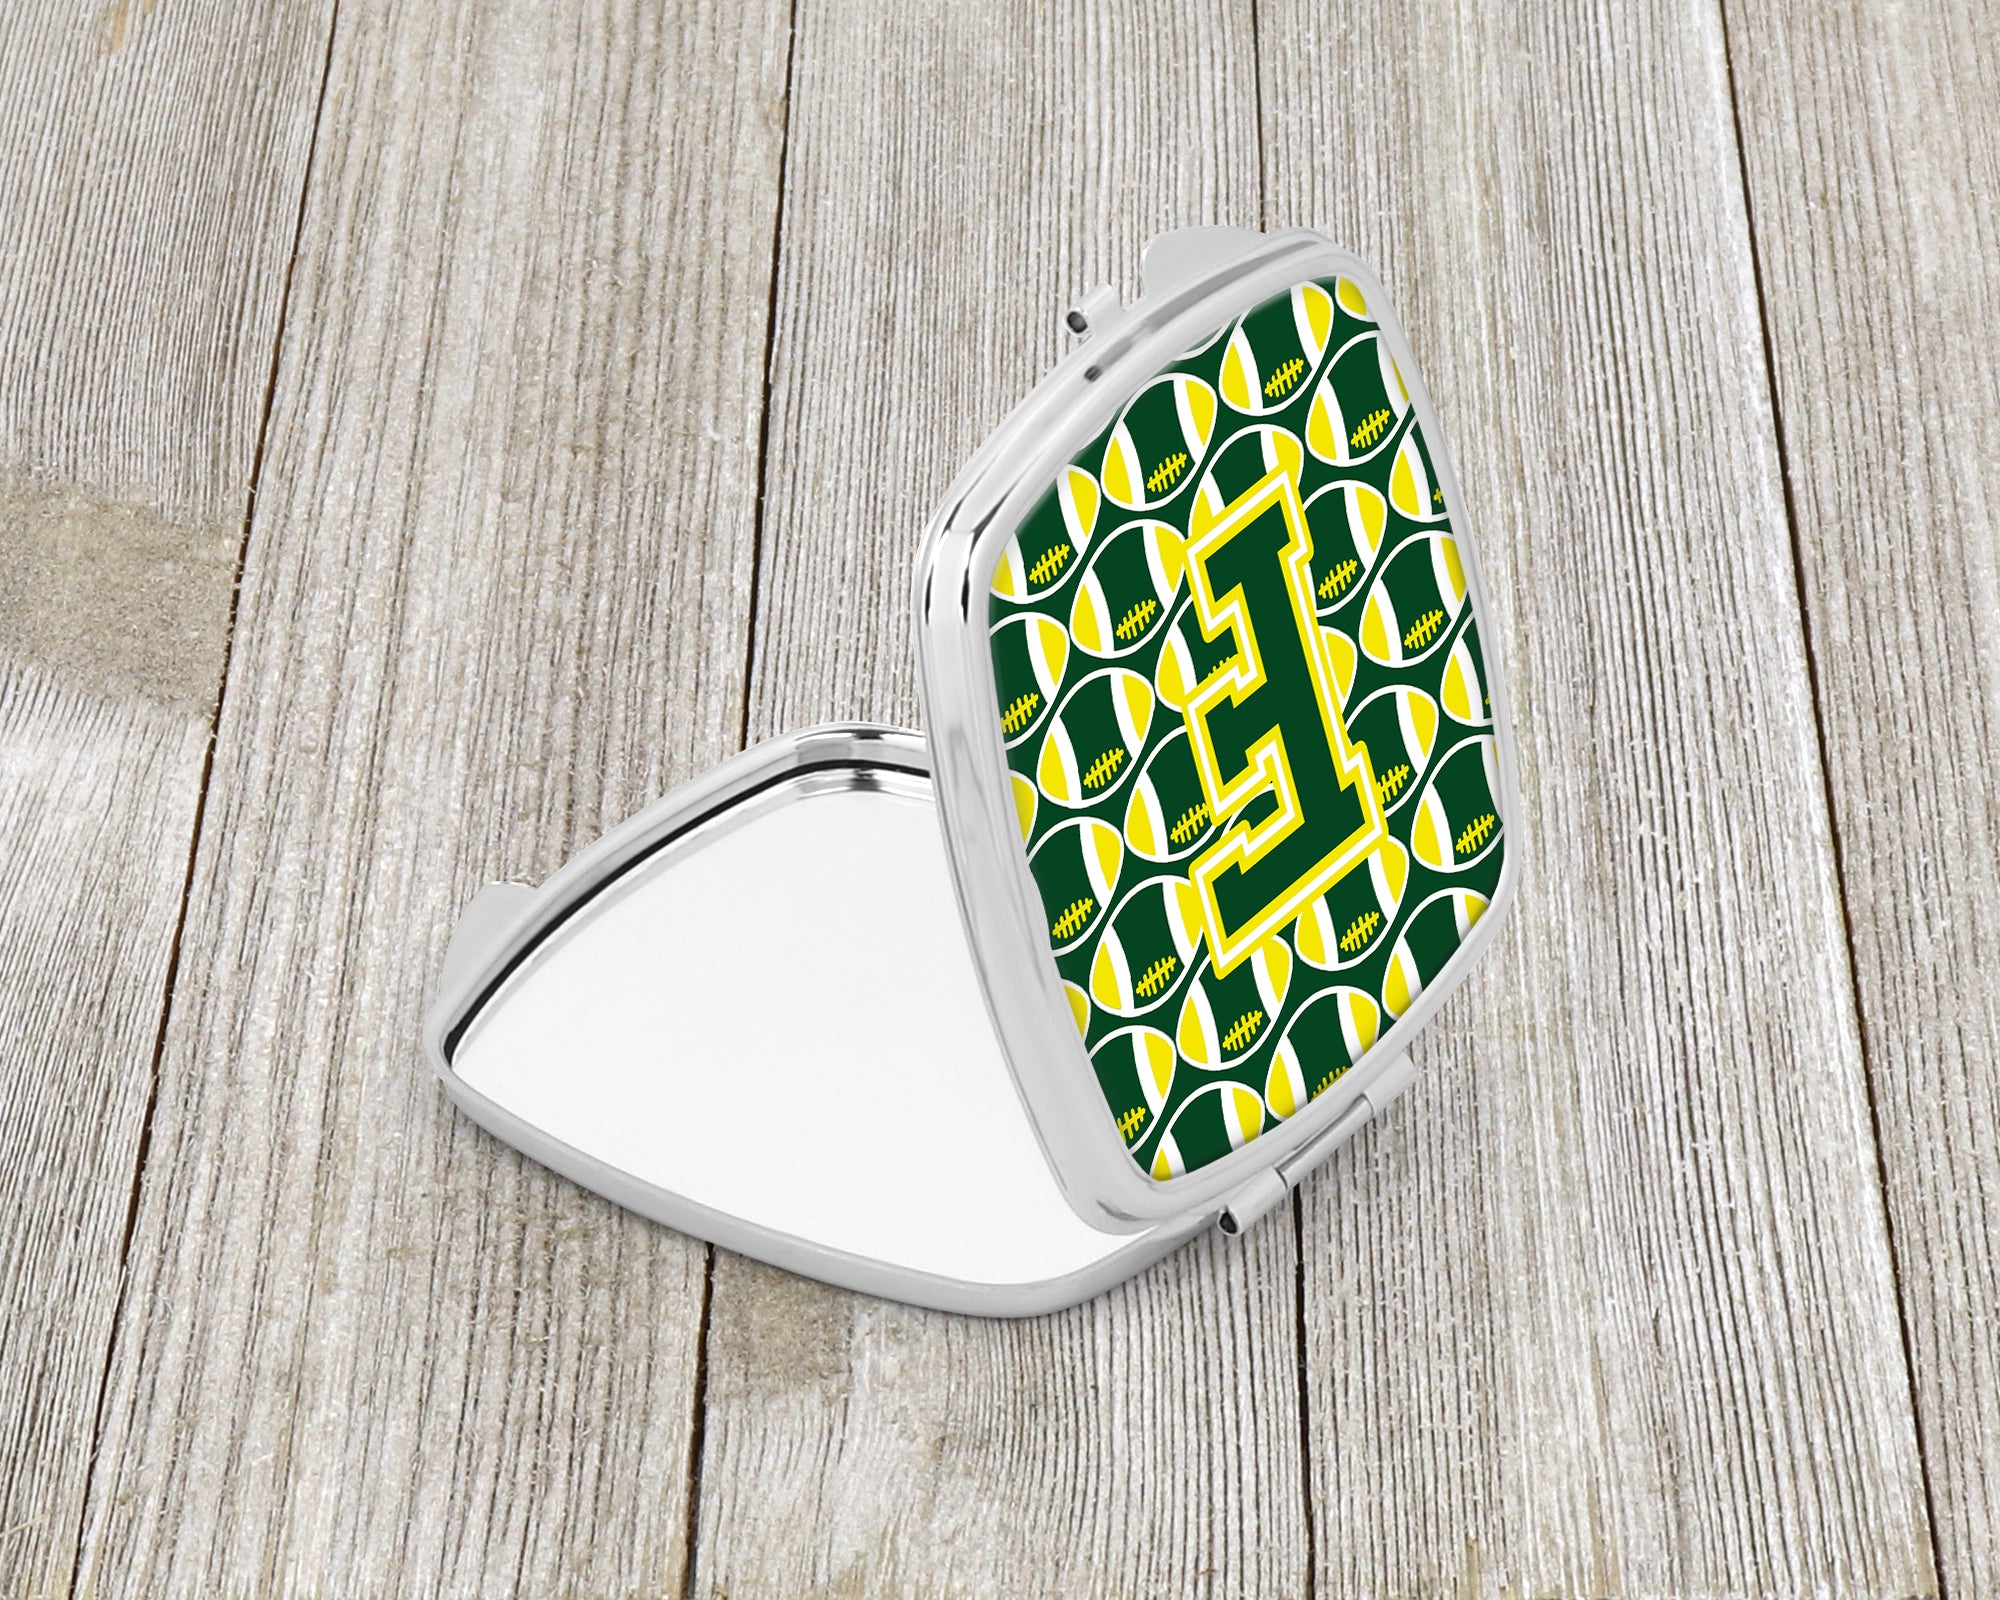 Letter F Football Green and Yellow Compact Mirror CJ1075-FSCM  the-store.com.